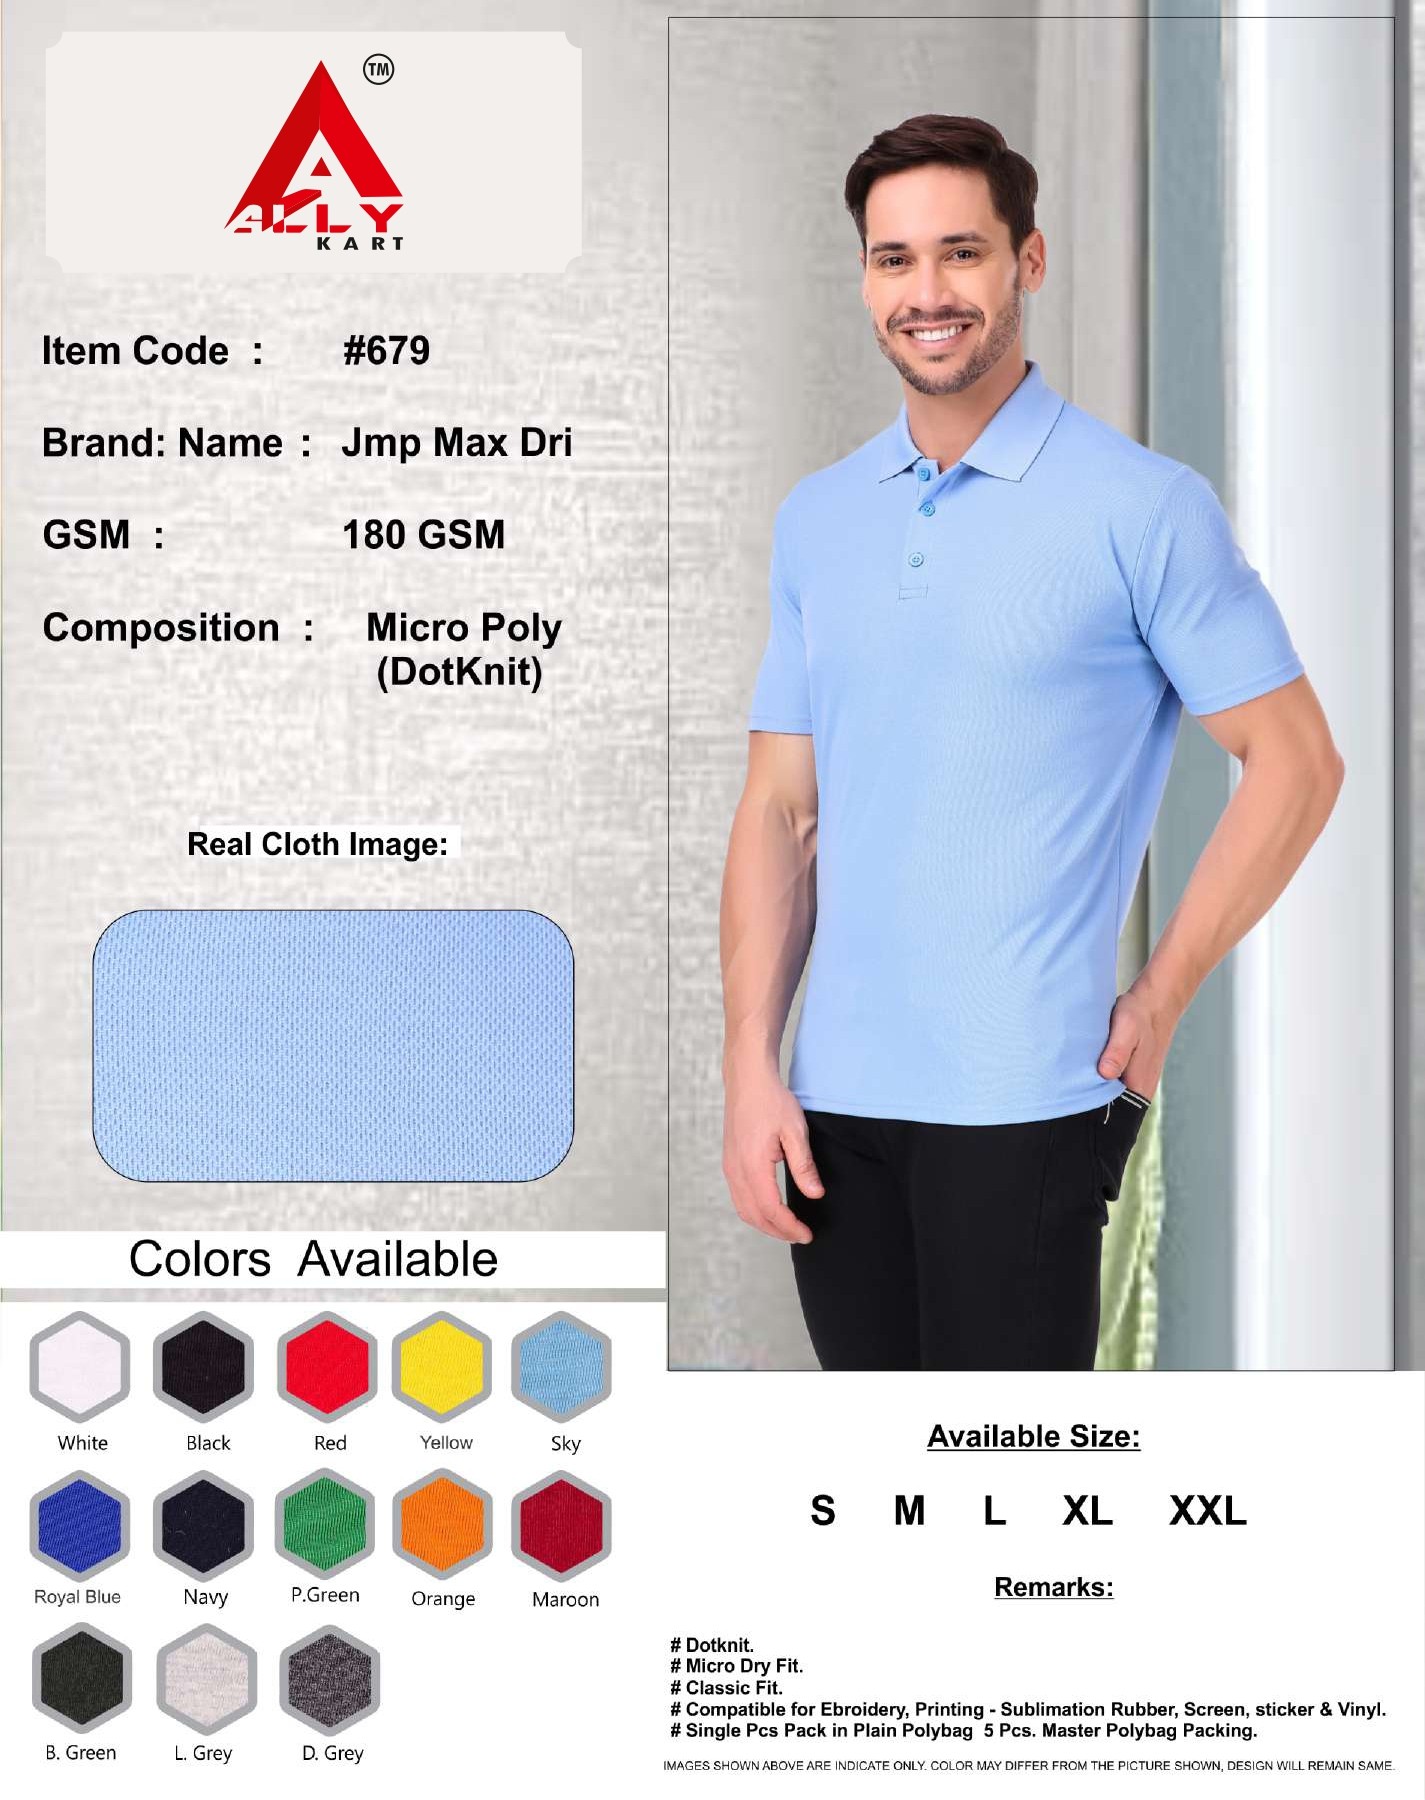 Ally Men’s T-Shirts Half Sleeve with Collar | with Button | Regular Slim Fit Plain Solid T -shirts  Casual Stylish Look | for Boys & Men